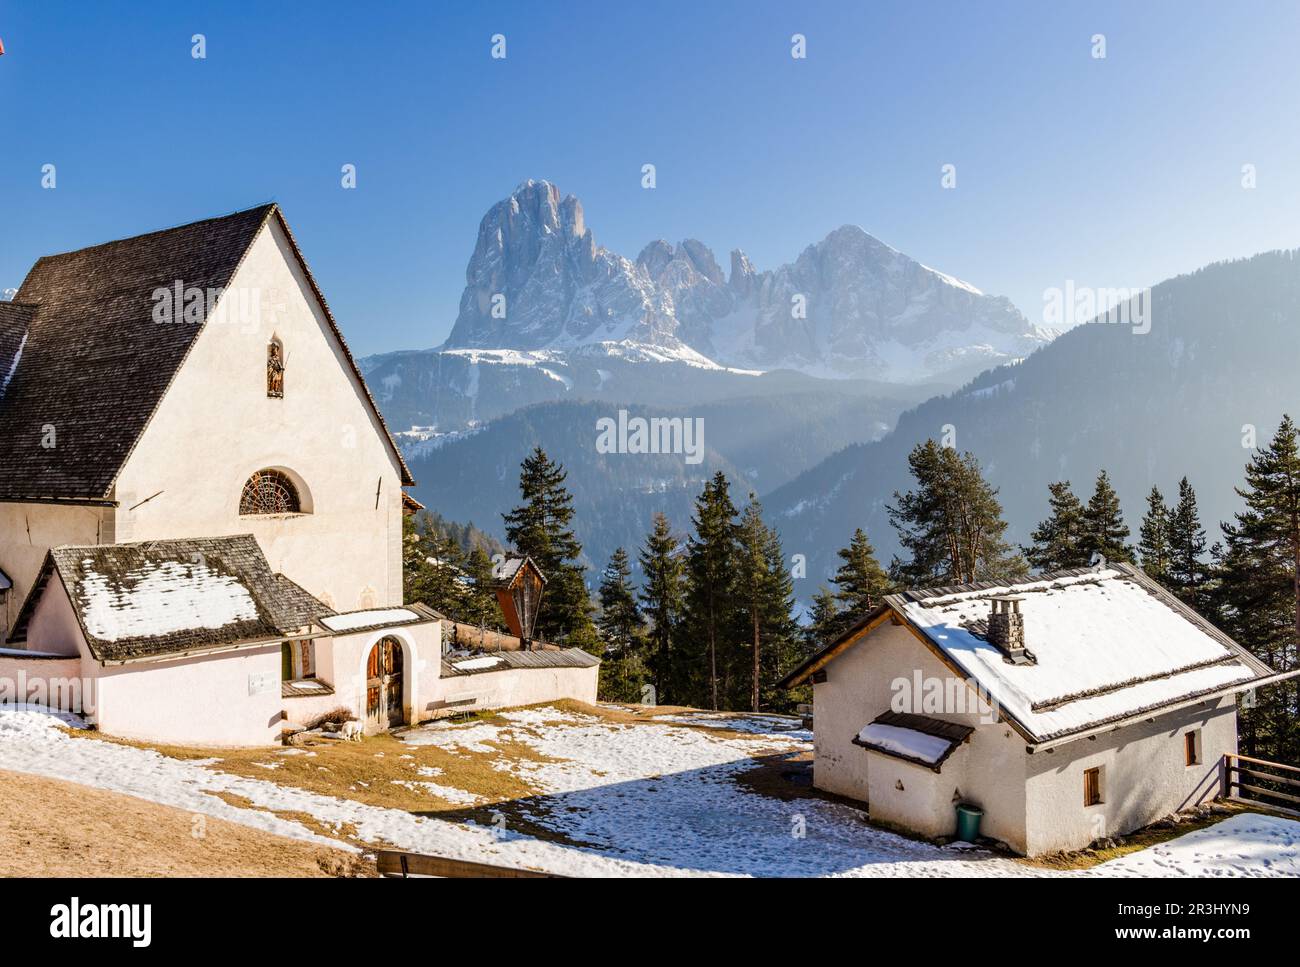 Church of St. Jacob overlooking pine forests and snow-capped peaks in winter Stock Photo